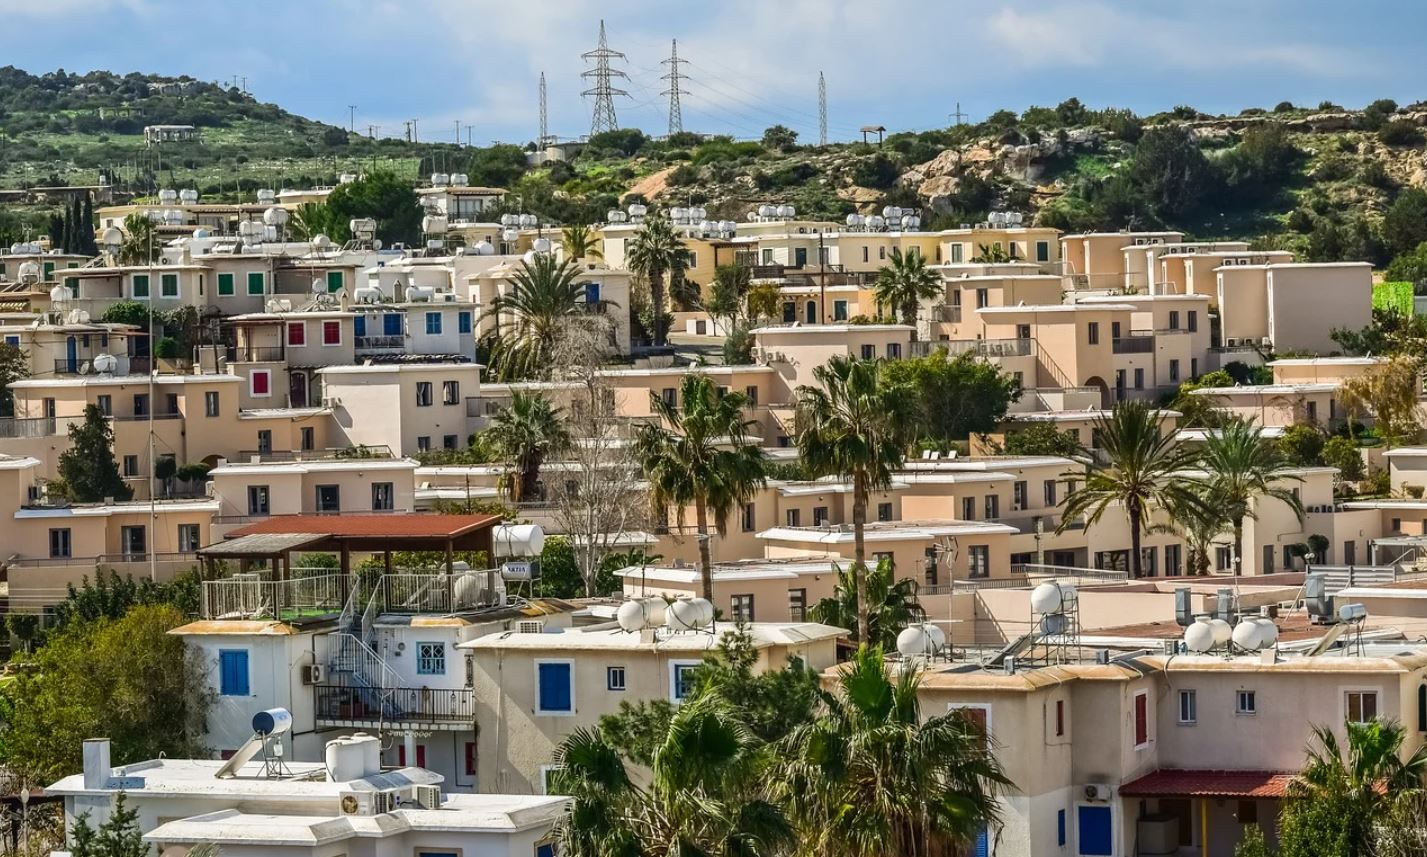 image Short-term rentals tarnishing Cyprus&#8217; image, push prices up, estate agents say